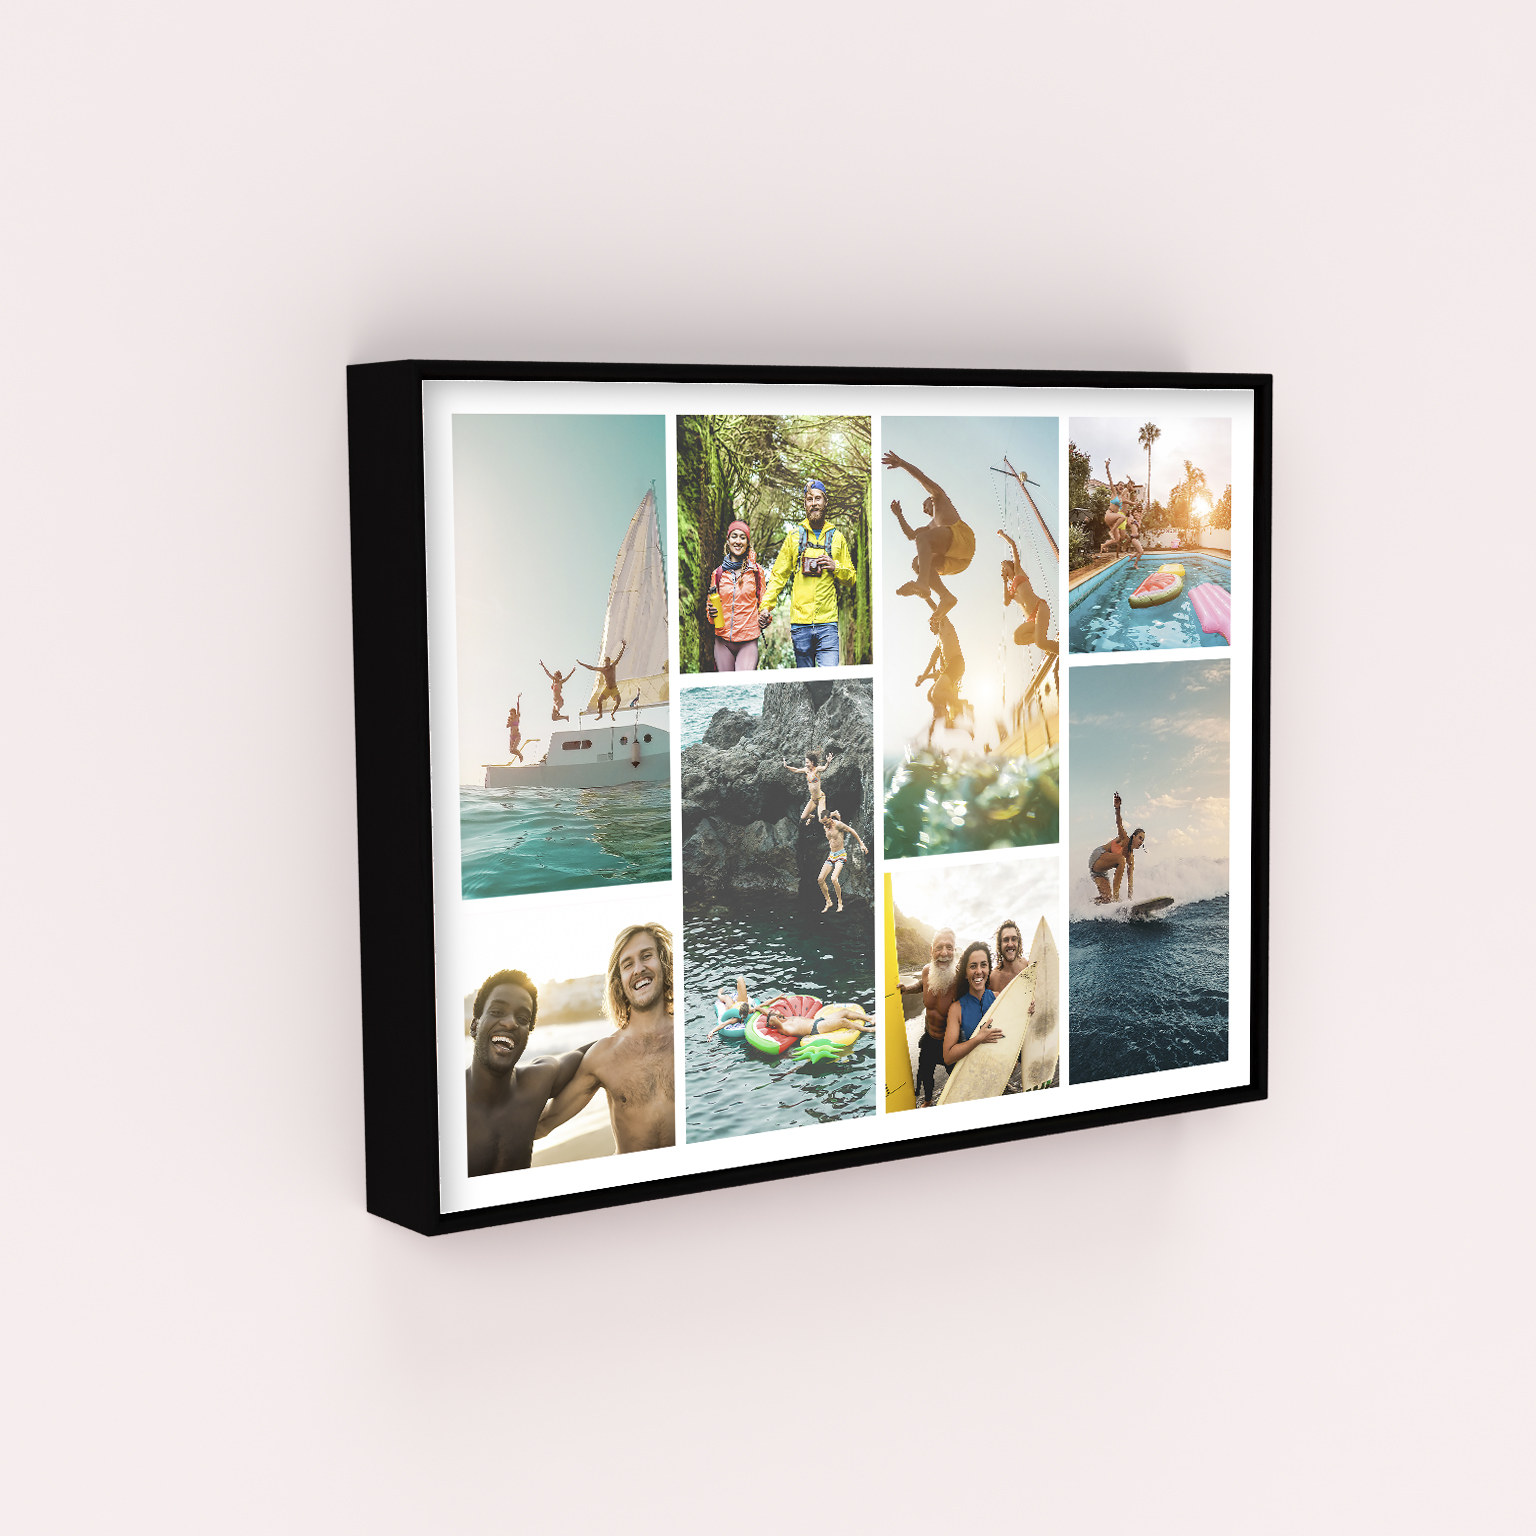 Boxed Picture Frames featuring Shutter Montage design - Create a stunning montage of cherished memories